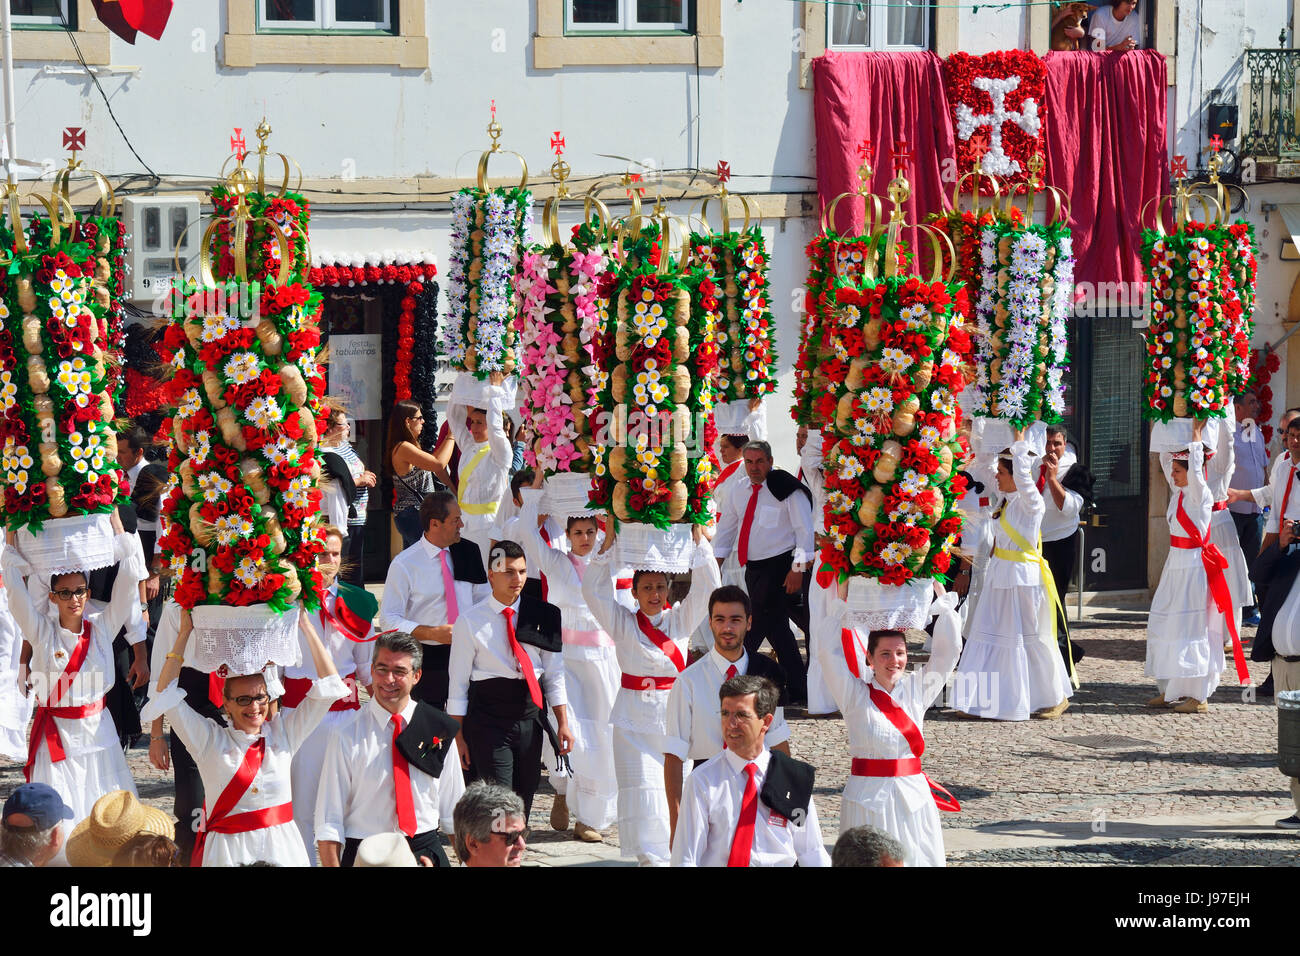 The Festa dos Tabuleiros (Festival of the Trays) in Tomar. Portugal